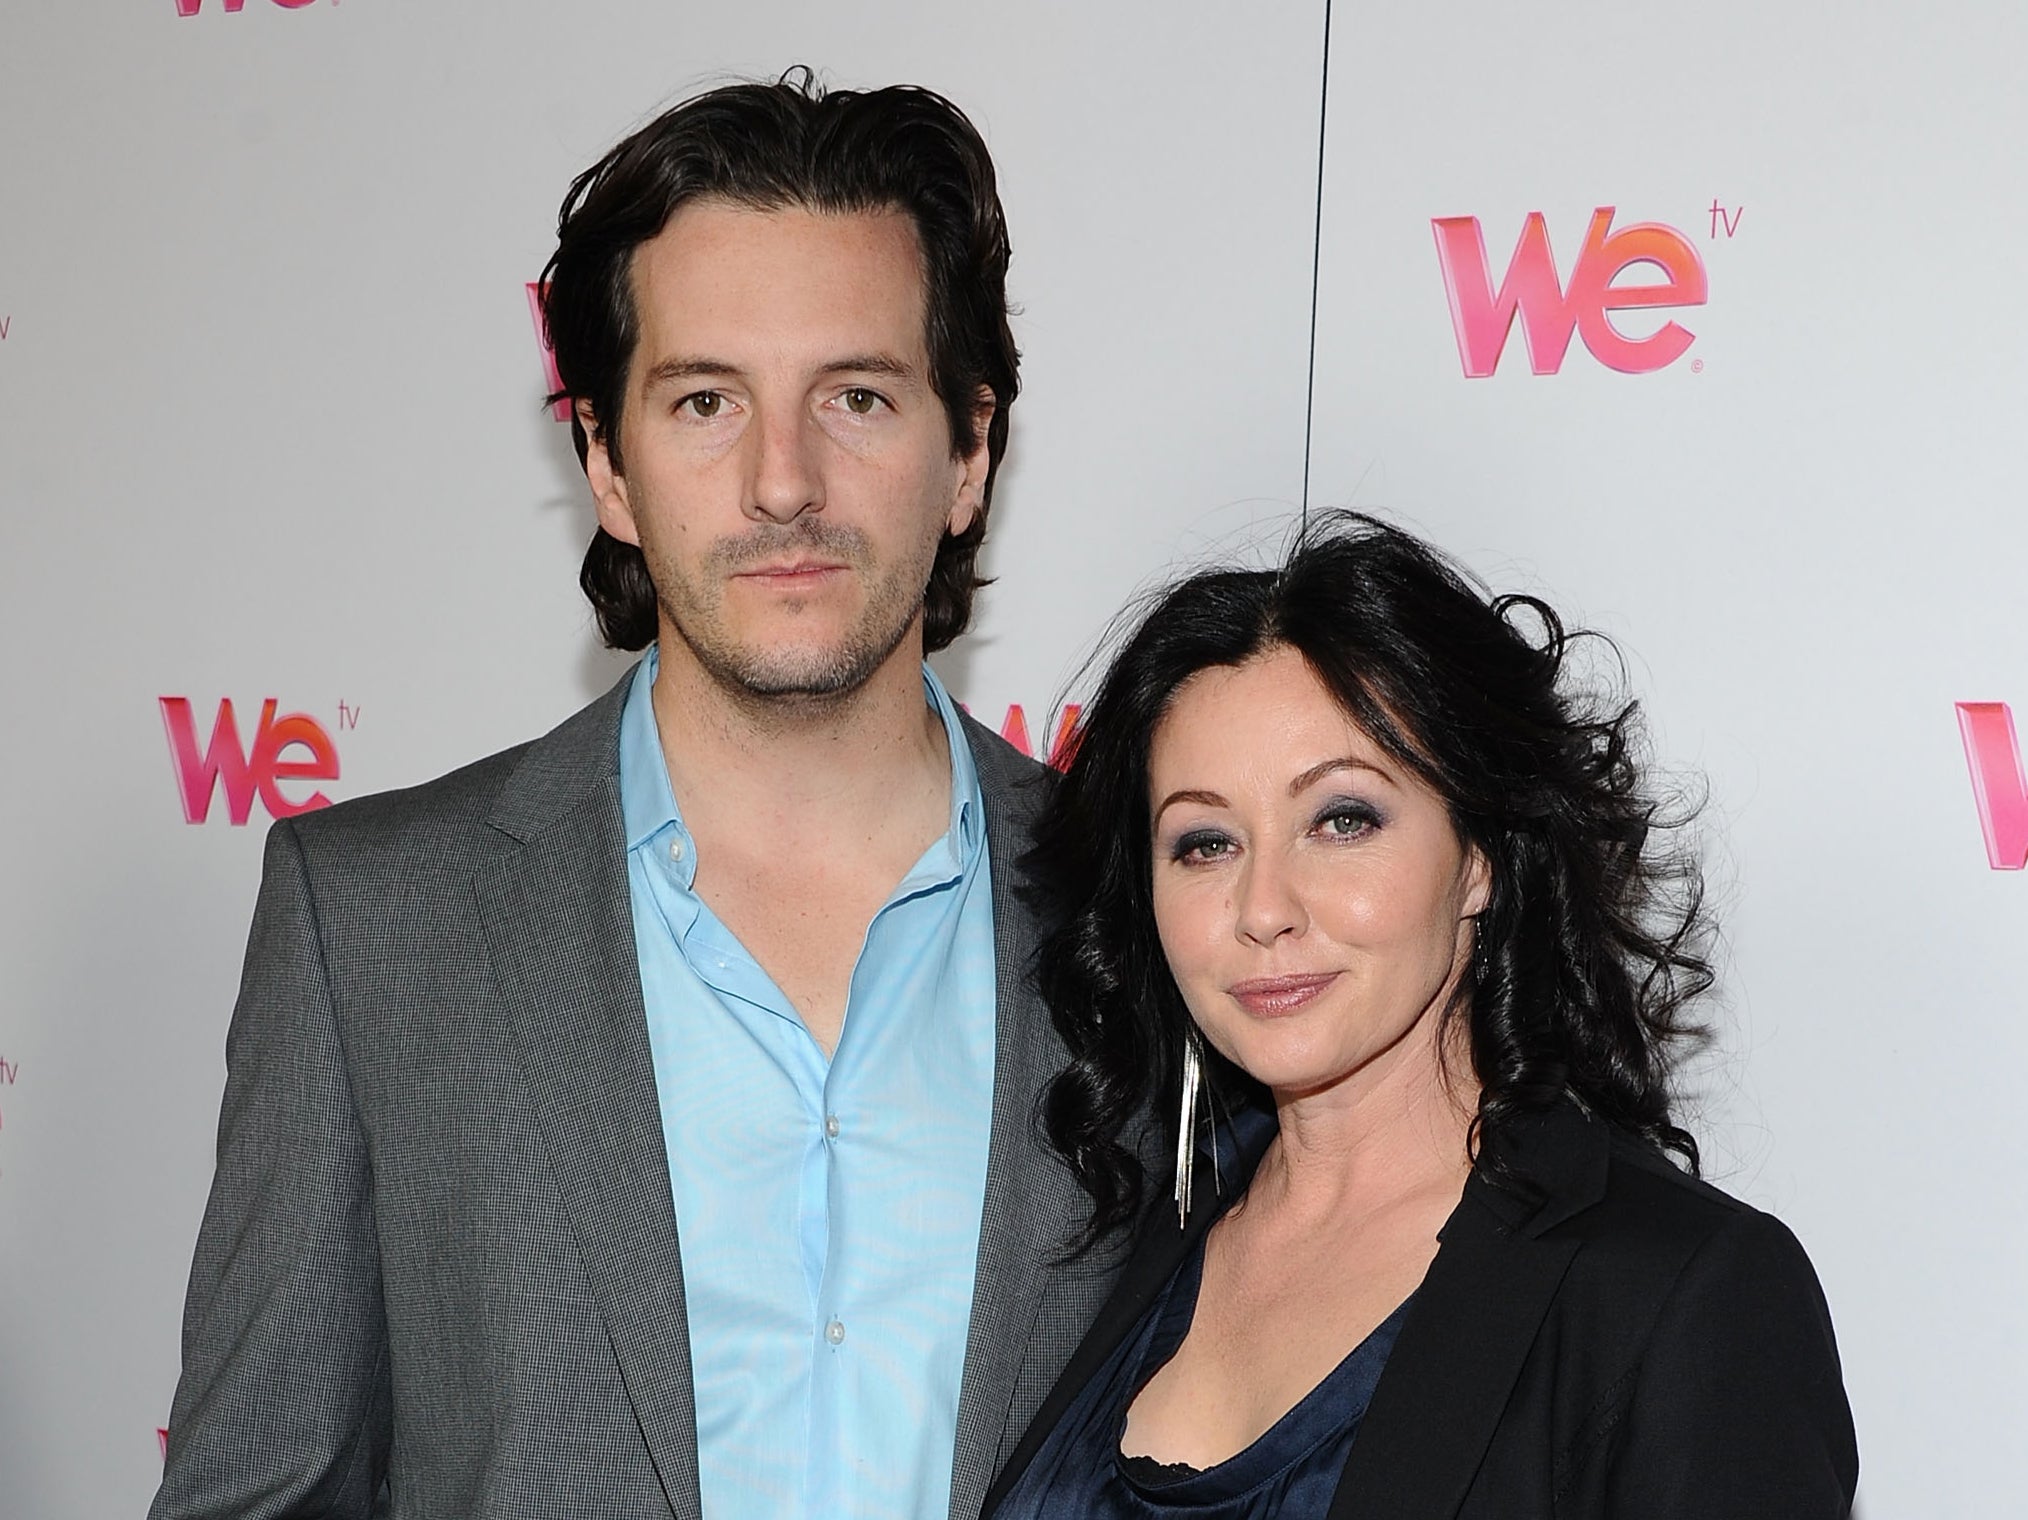 Photographer Kurt Iswarienko and actress Shannen Doherty arrive at WE tv’s ‘Family Affair’ 2012 Winter TCA event at Langham Hotel on 13 January 2012 in Pasadena, California (Angela Weiss/Getty Images)